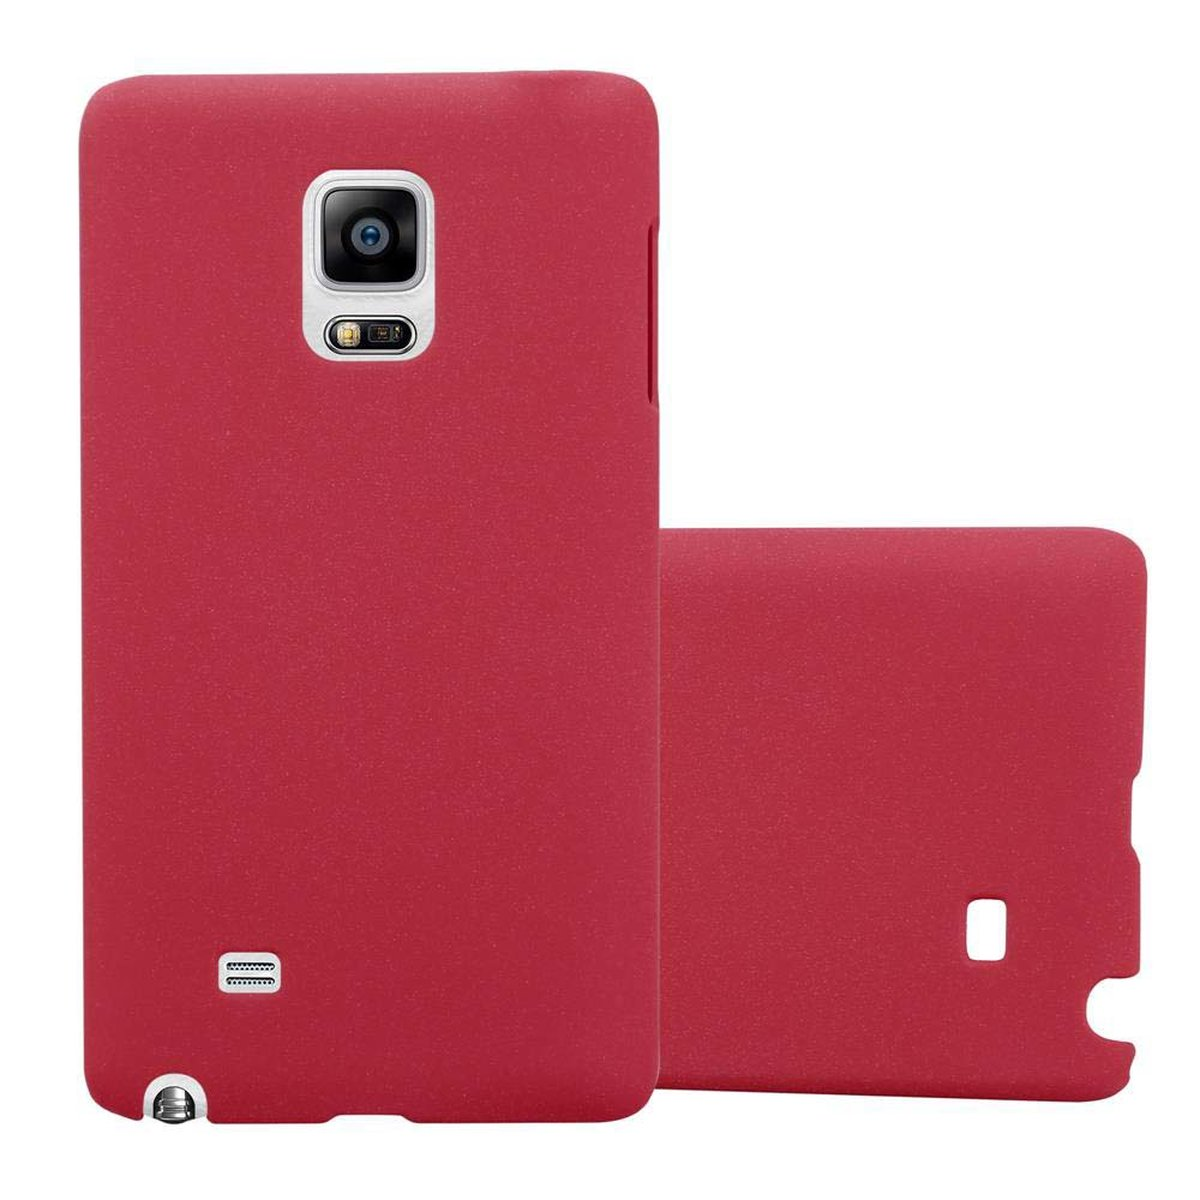 Frosty FROSTY CADORABO im Samsung, ROT NOTE Hülle Hard EDGE, Case Galaxy Backcover, Style,